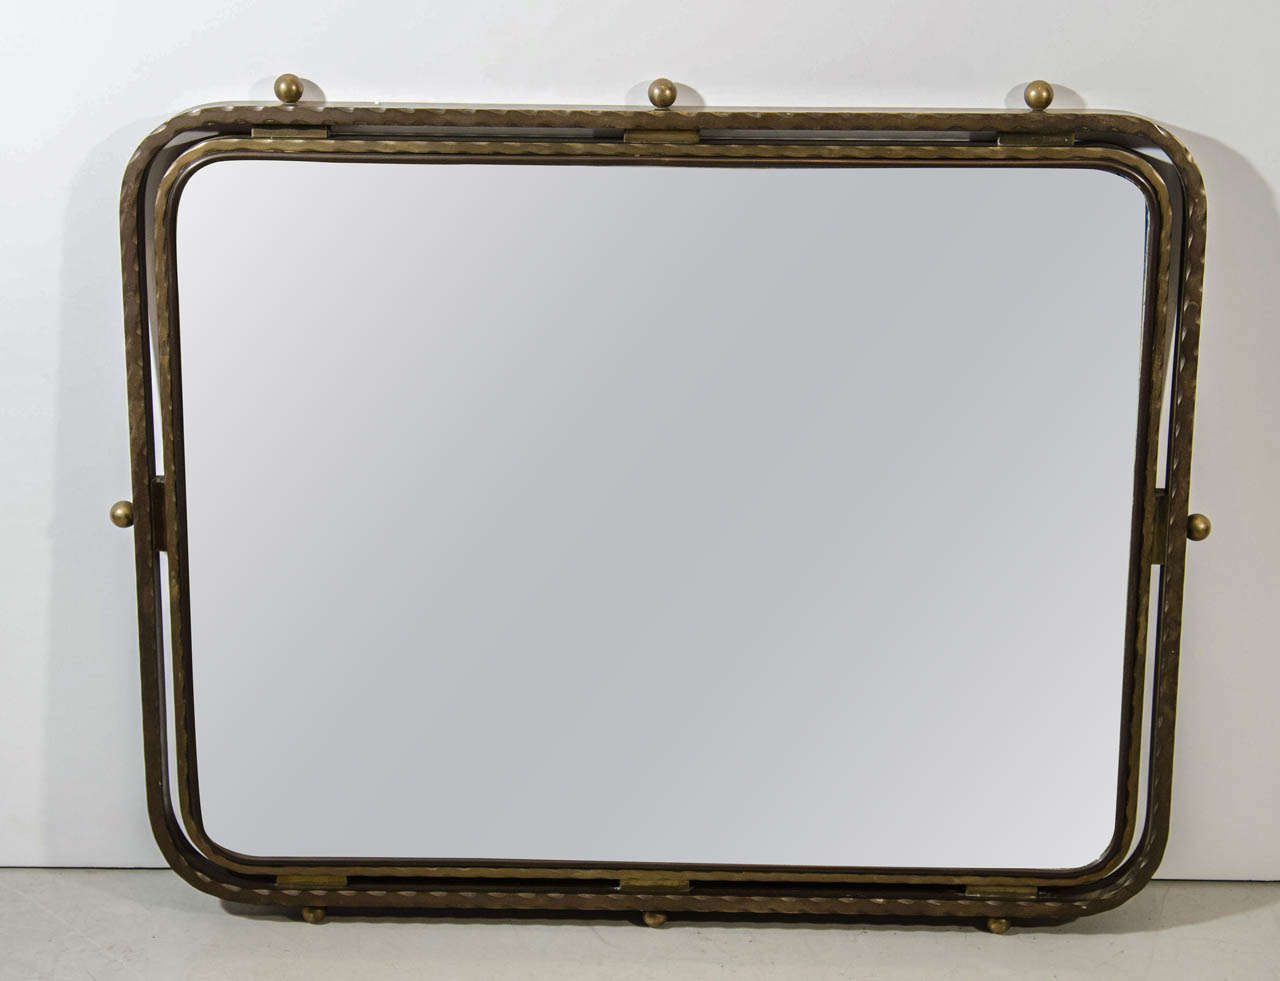 Designed in the late deco period of Streamline Moderne this solid brass mirror provides a look at the evolution of design. Created in the late 1930s this mirror shows how Streamline moderne with its curves and clean lines bridge the gap between Art